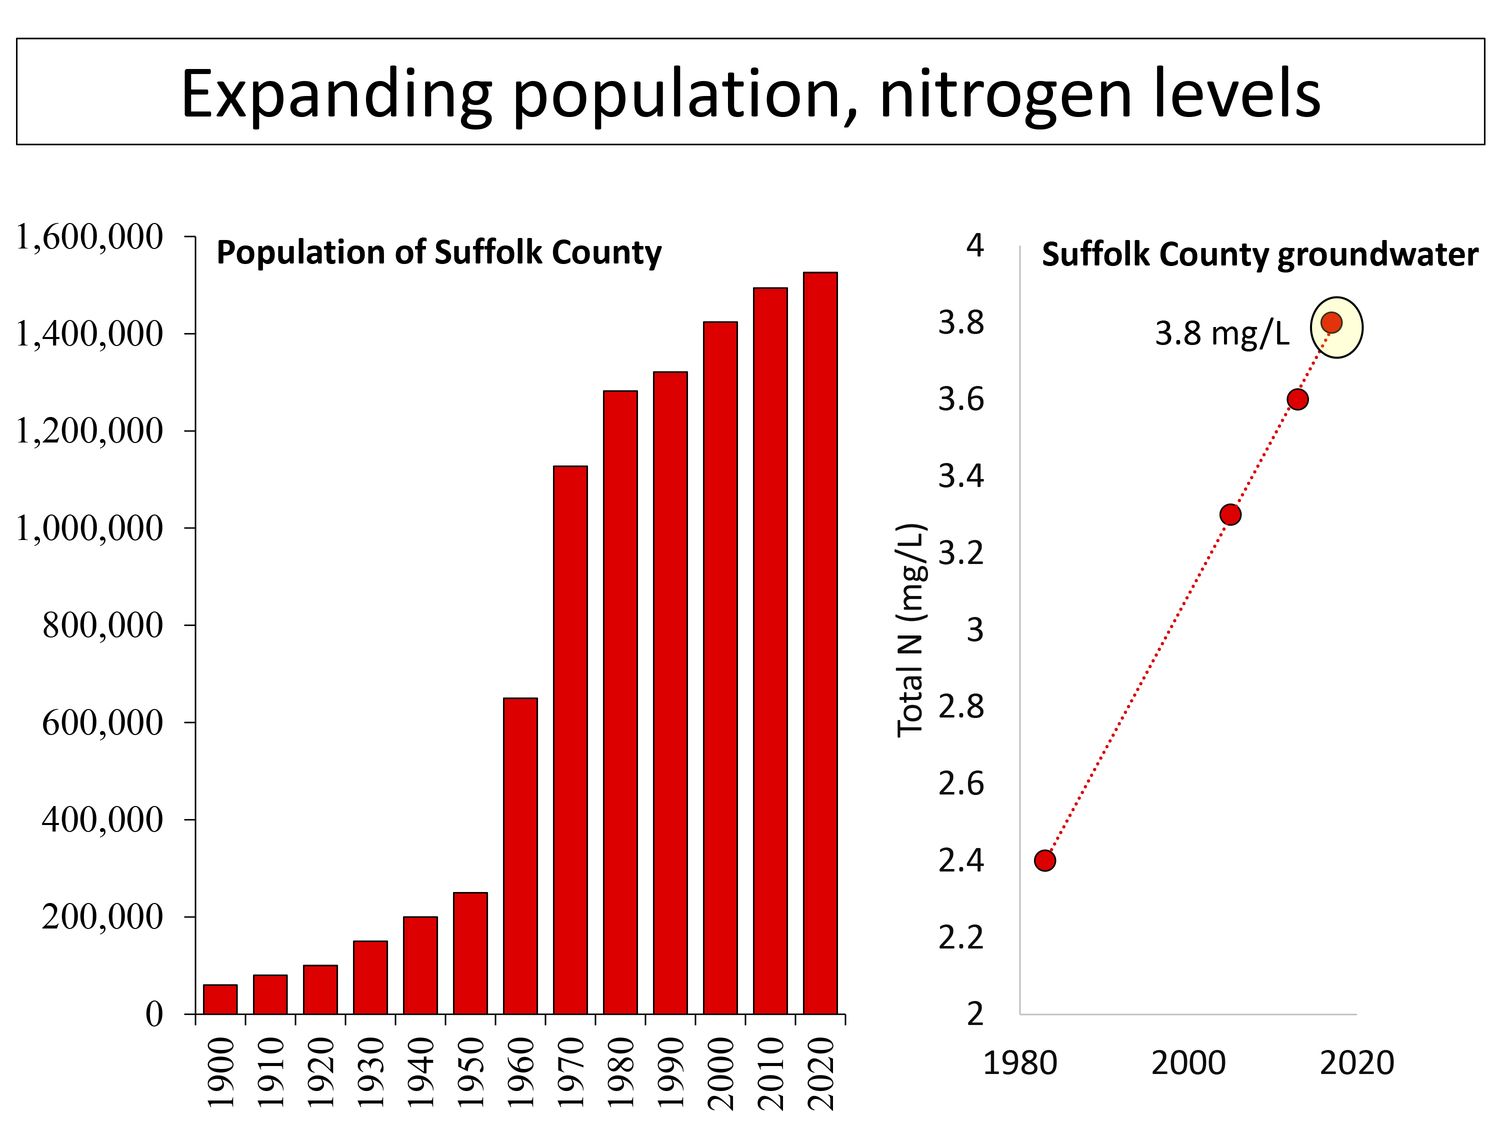 Nitrogen levels in Suffolk County groundwater have soared with population growth, presenting broad environmental and human health concerns, including cancer risks in humans and developmental issues in newborn babies. COURTESY OF THE GOBLER LAB